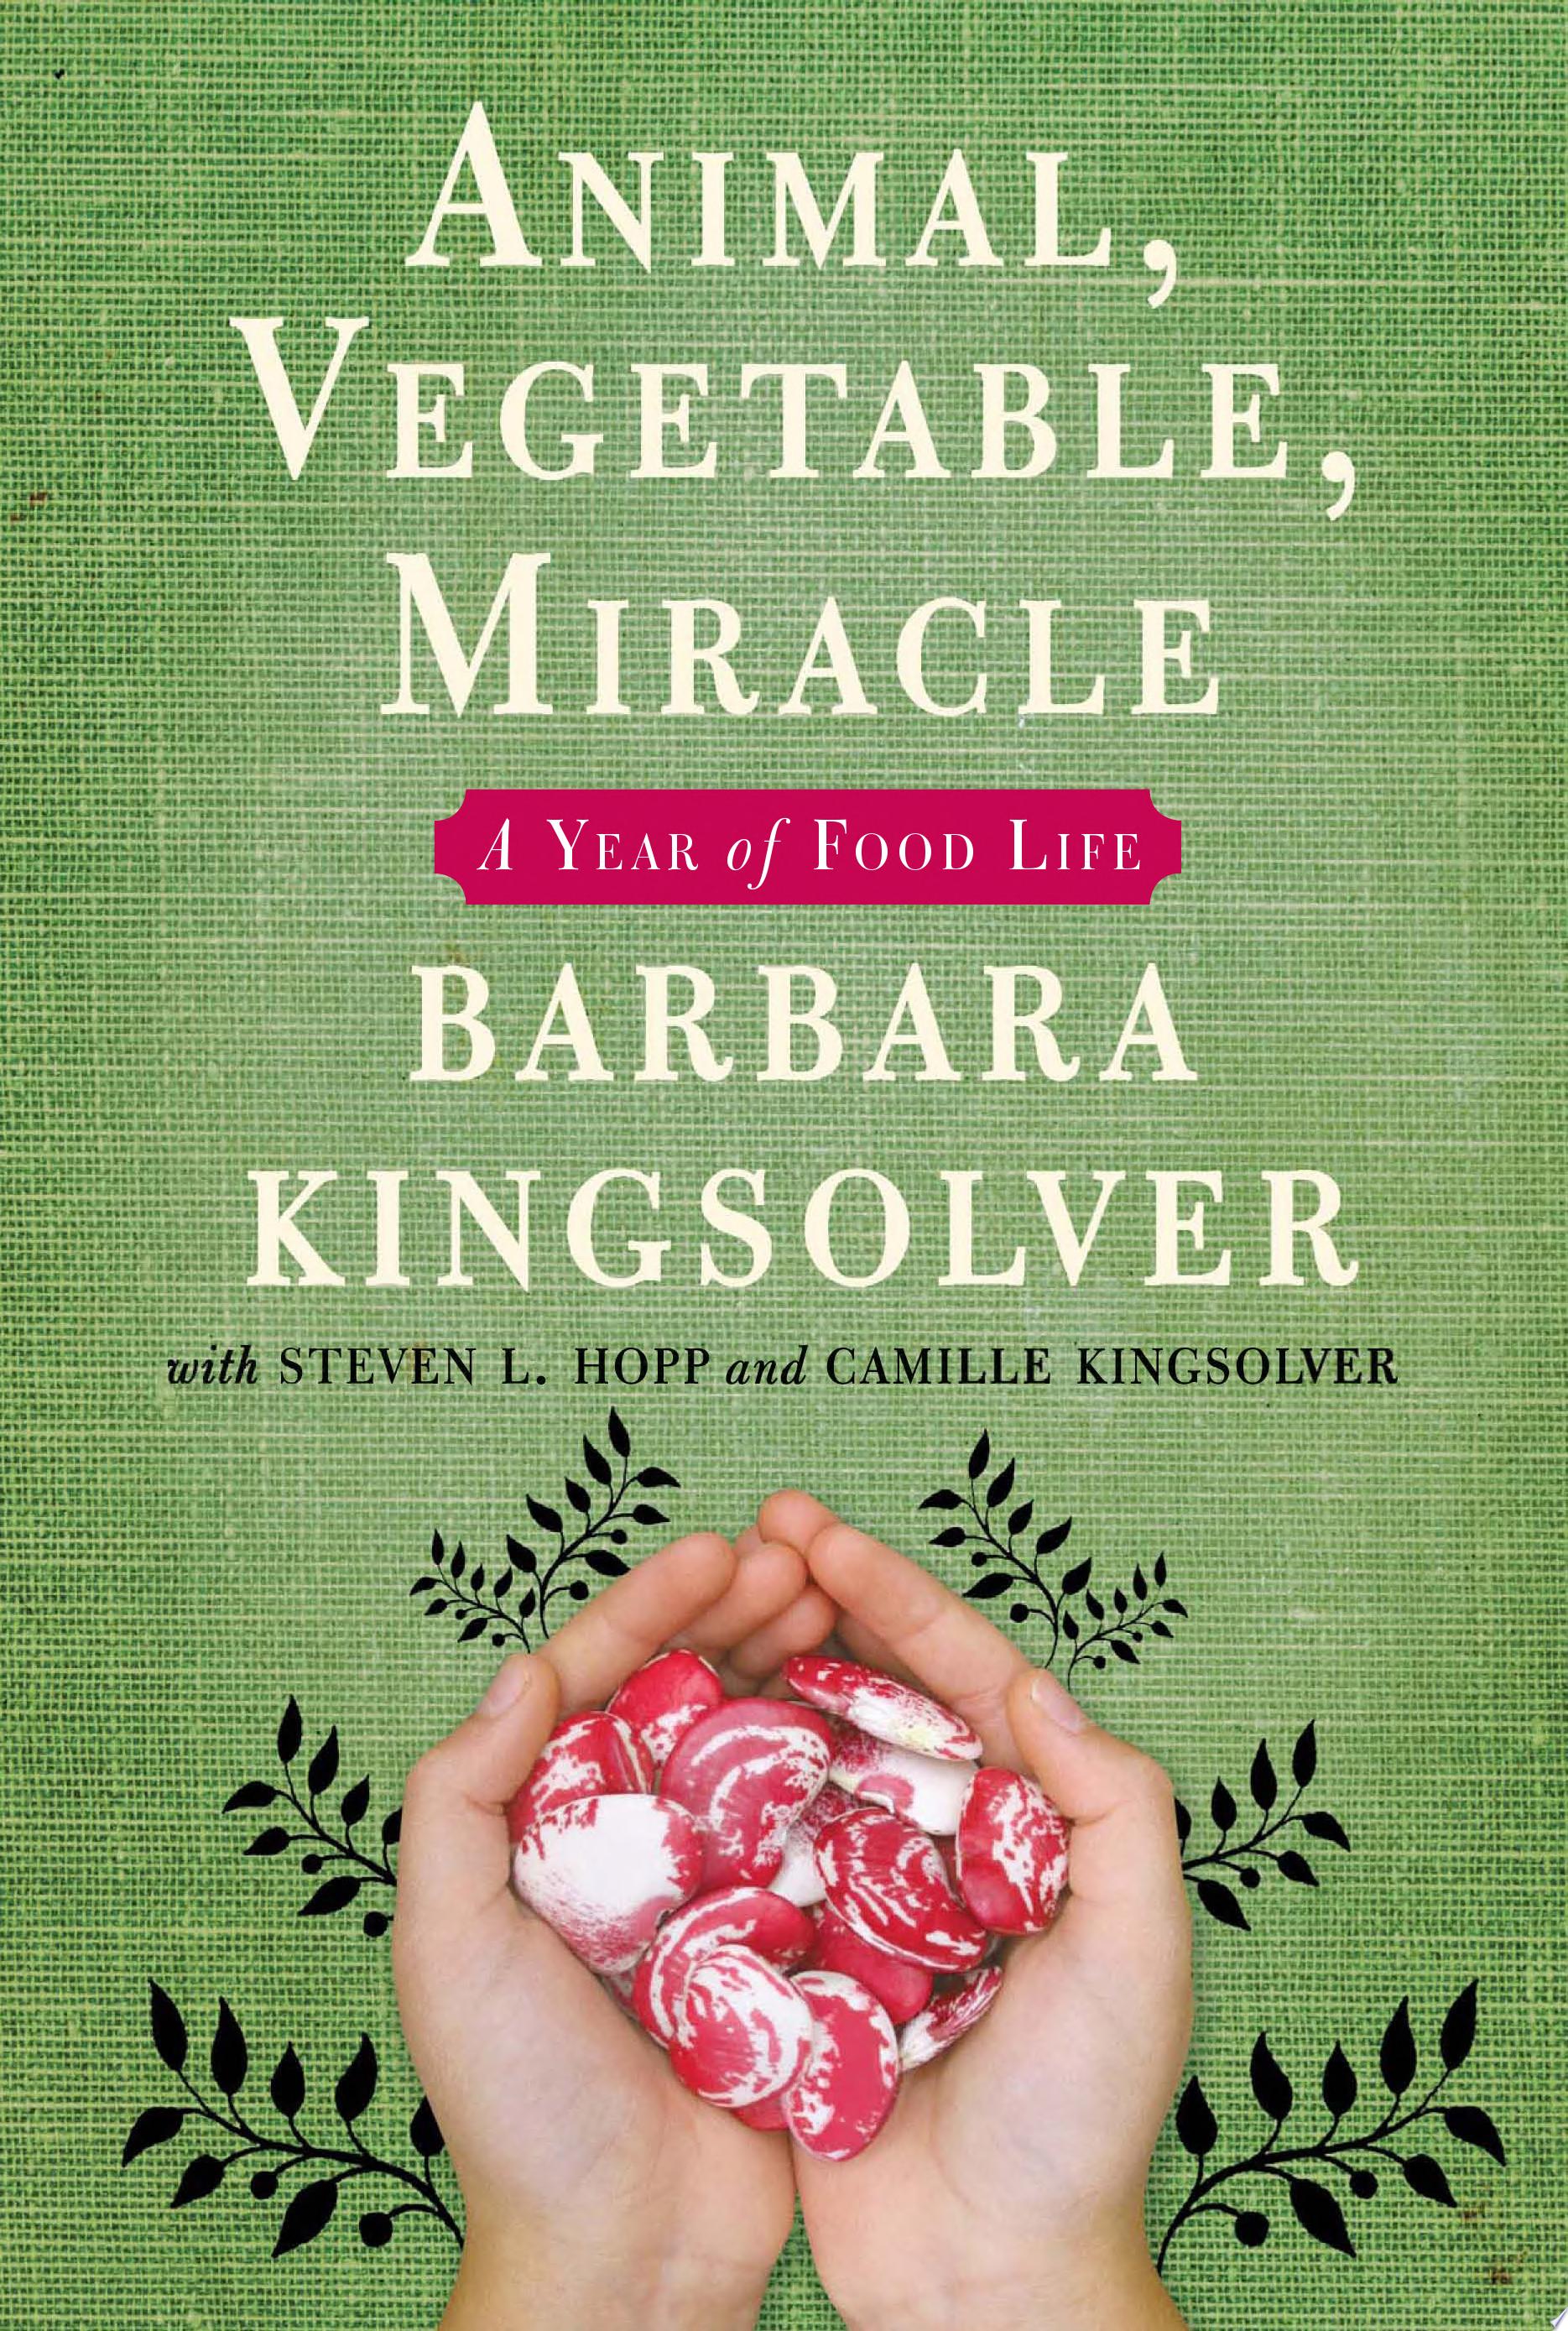 Image for "Animal, Vegetable, Miracle"